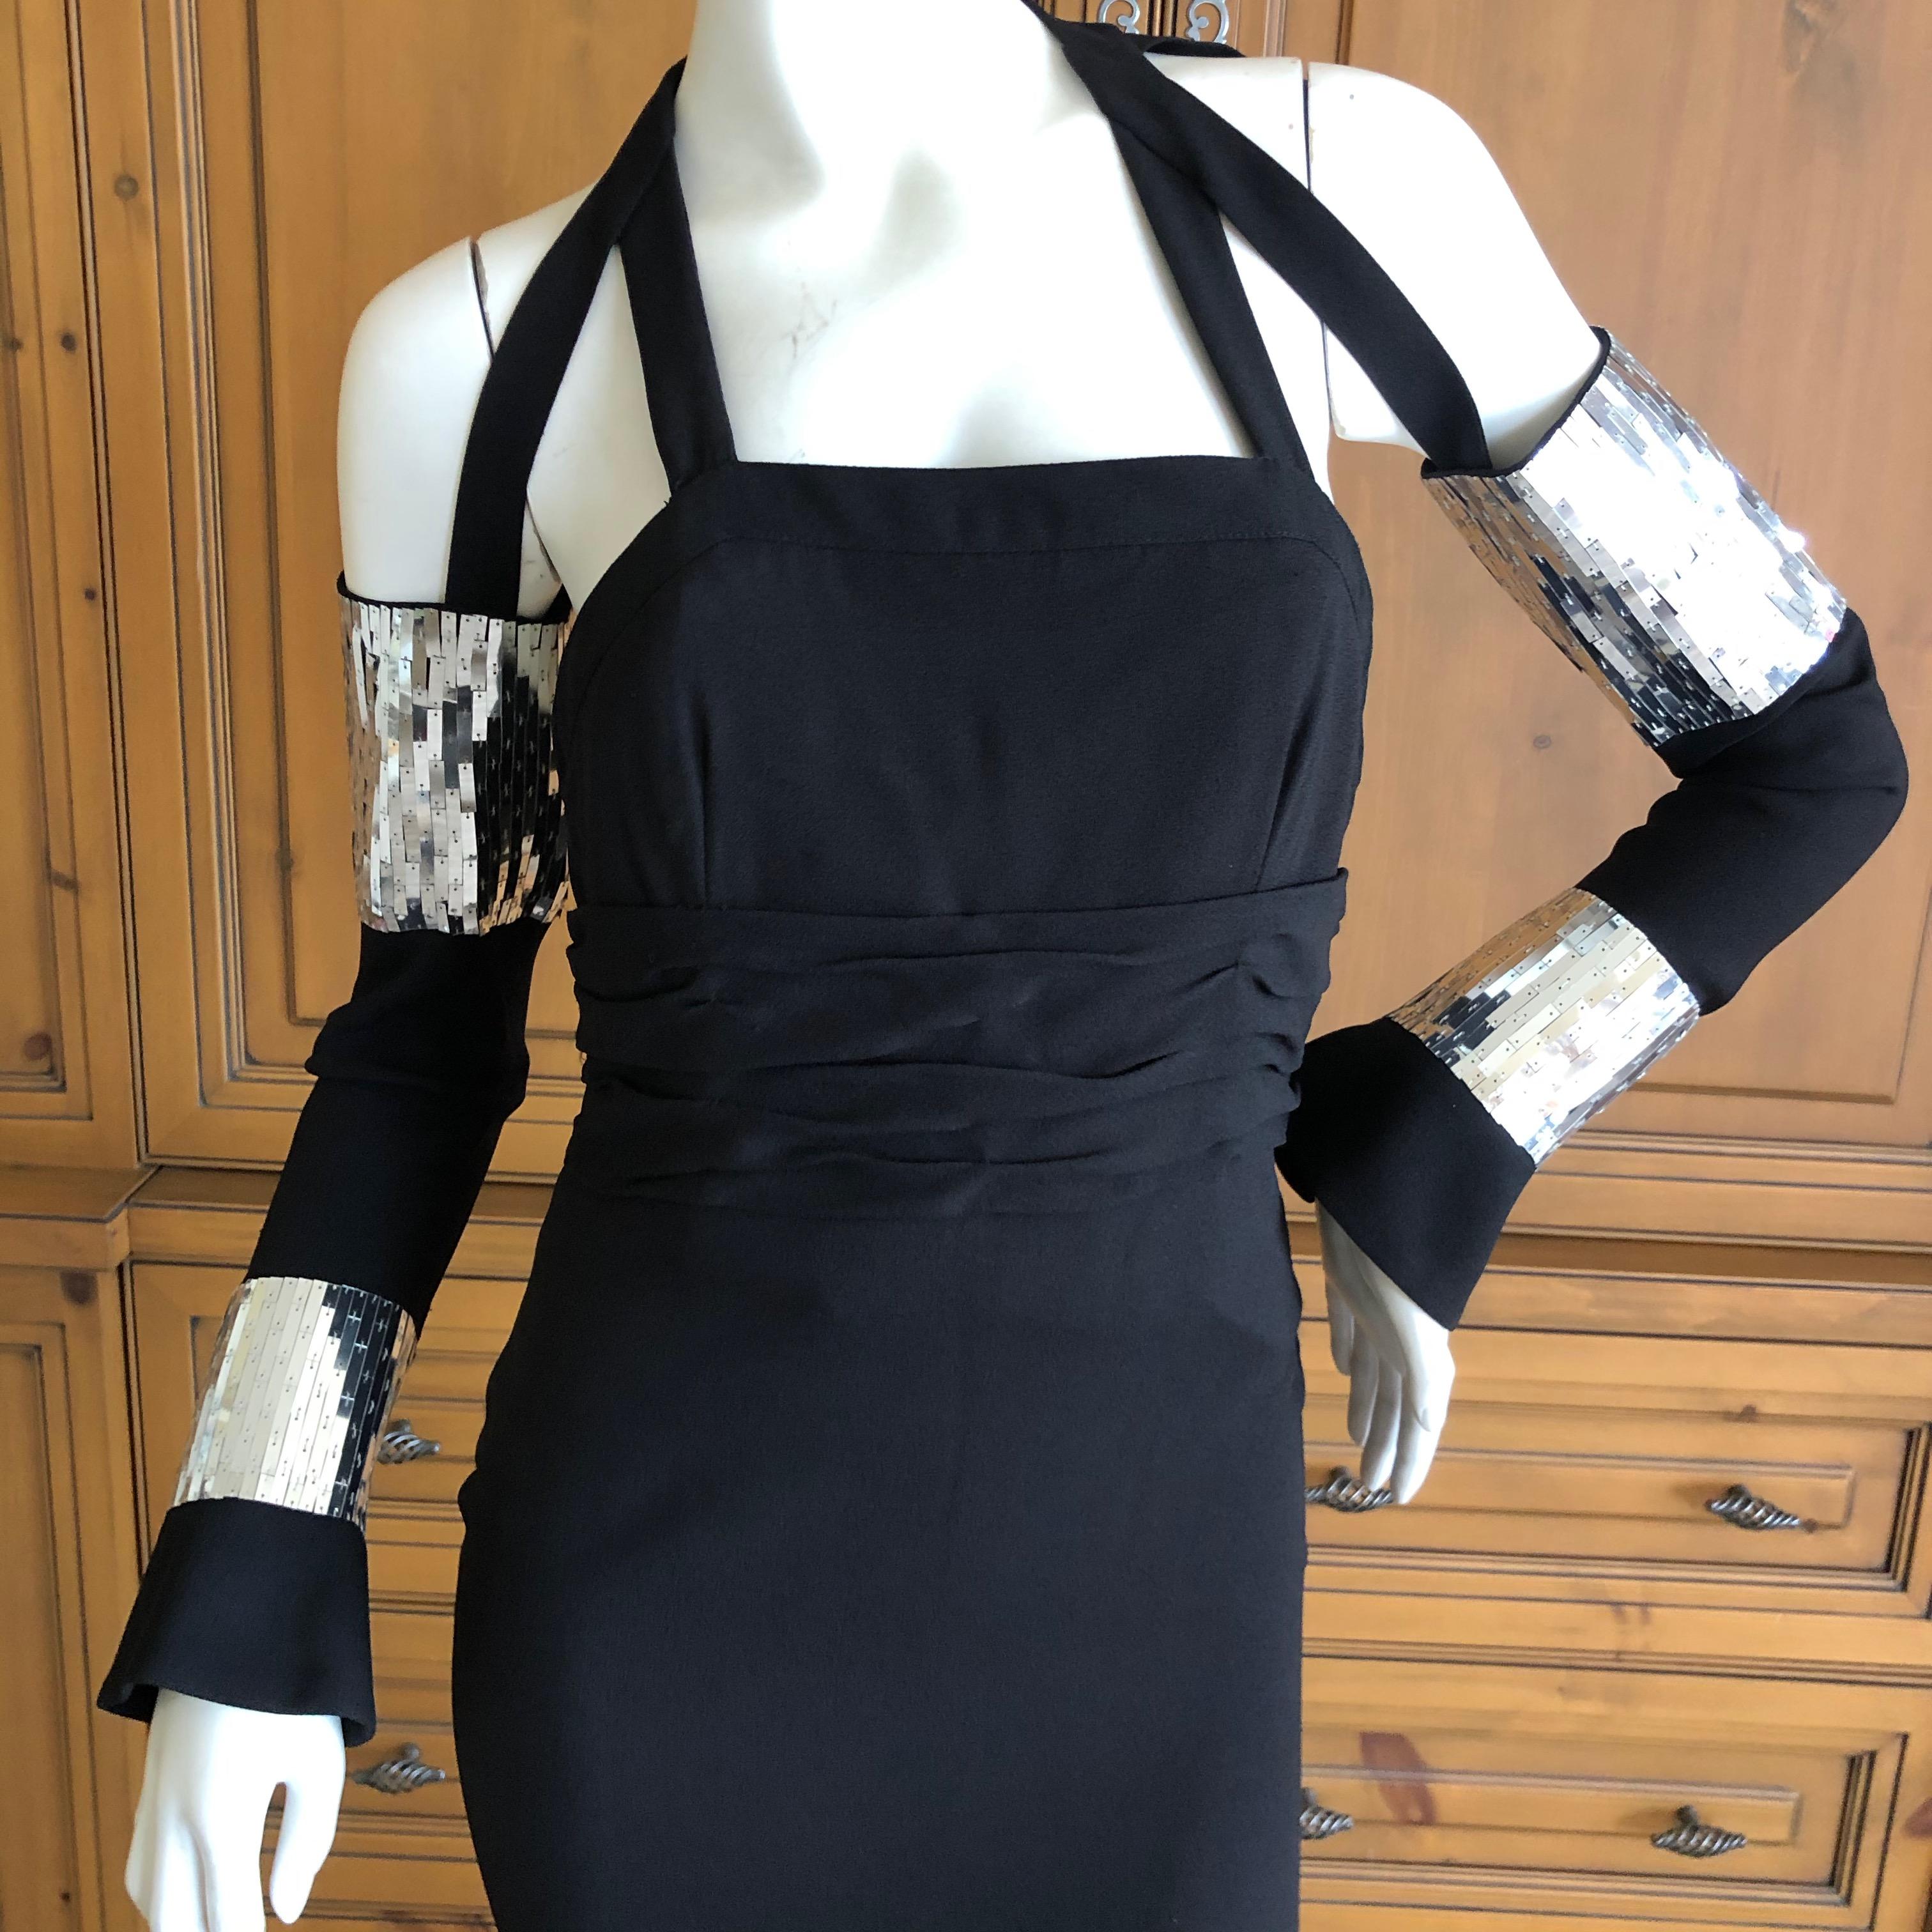 Karl Lagerfeld 1984 Evening Dress with Sequin Sleeves Attached by Bondage Straps In Excellent Condition For Sale In Cloverdale, CA